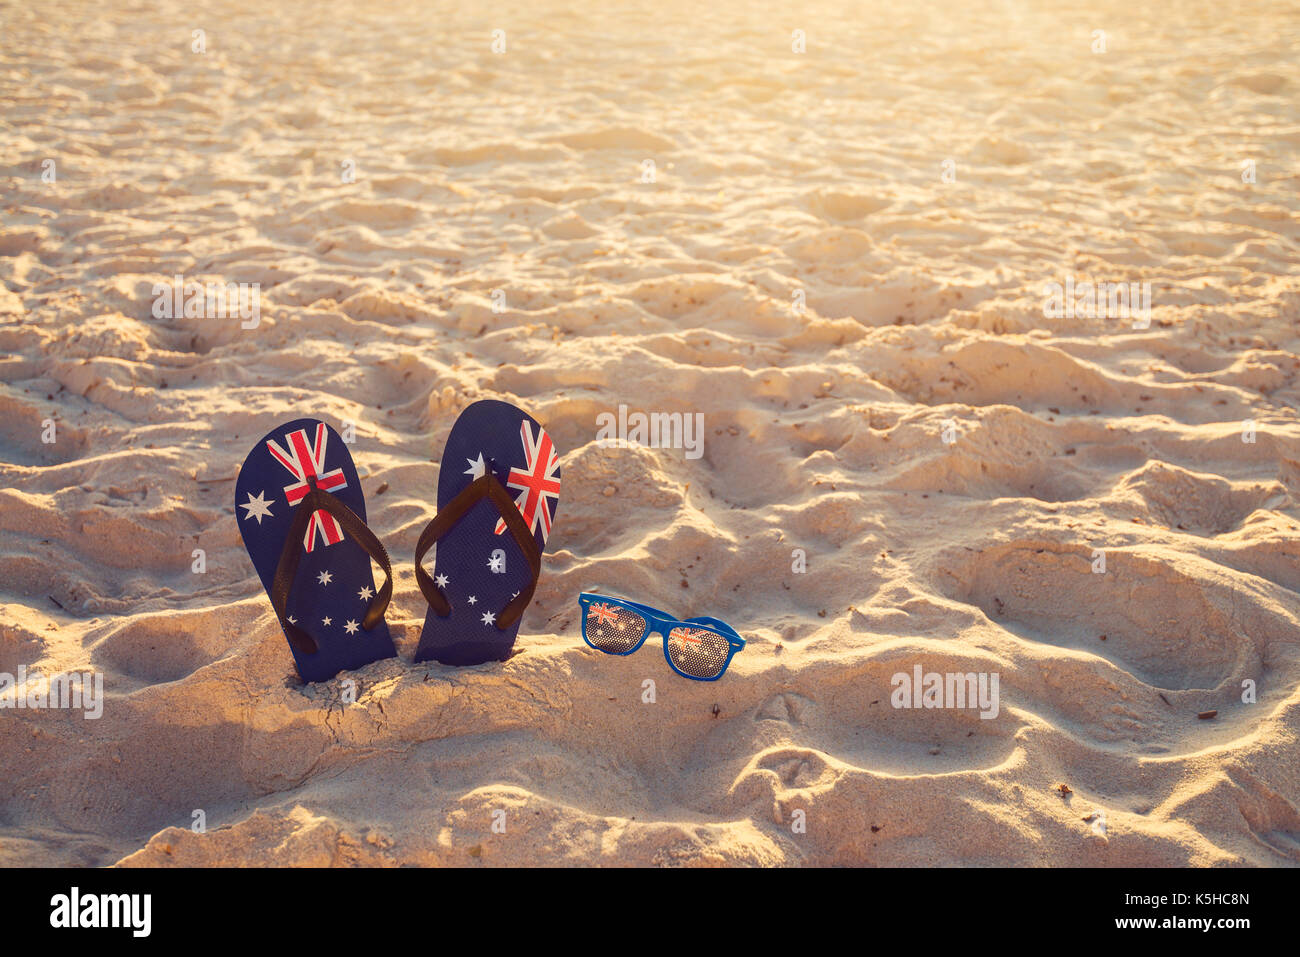 Thongs and sunglasses in sand on a beach, Australia day concept Stock Photo